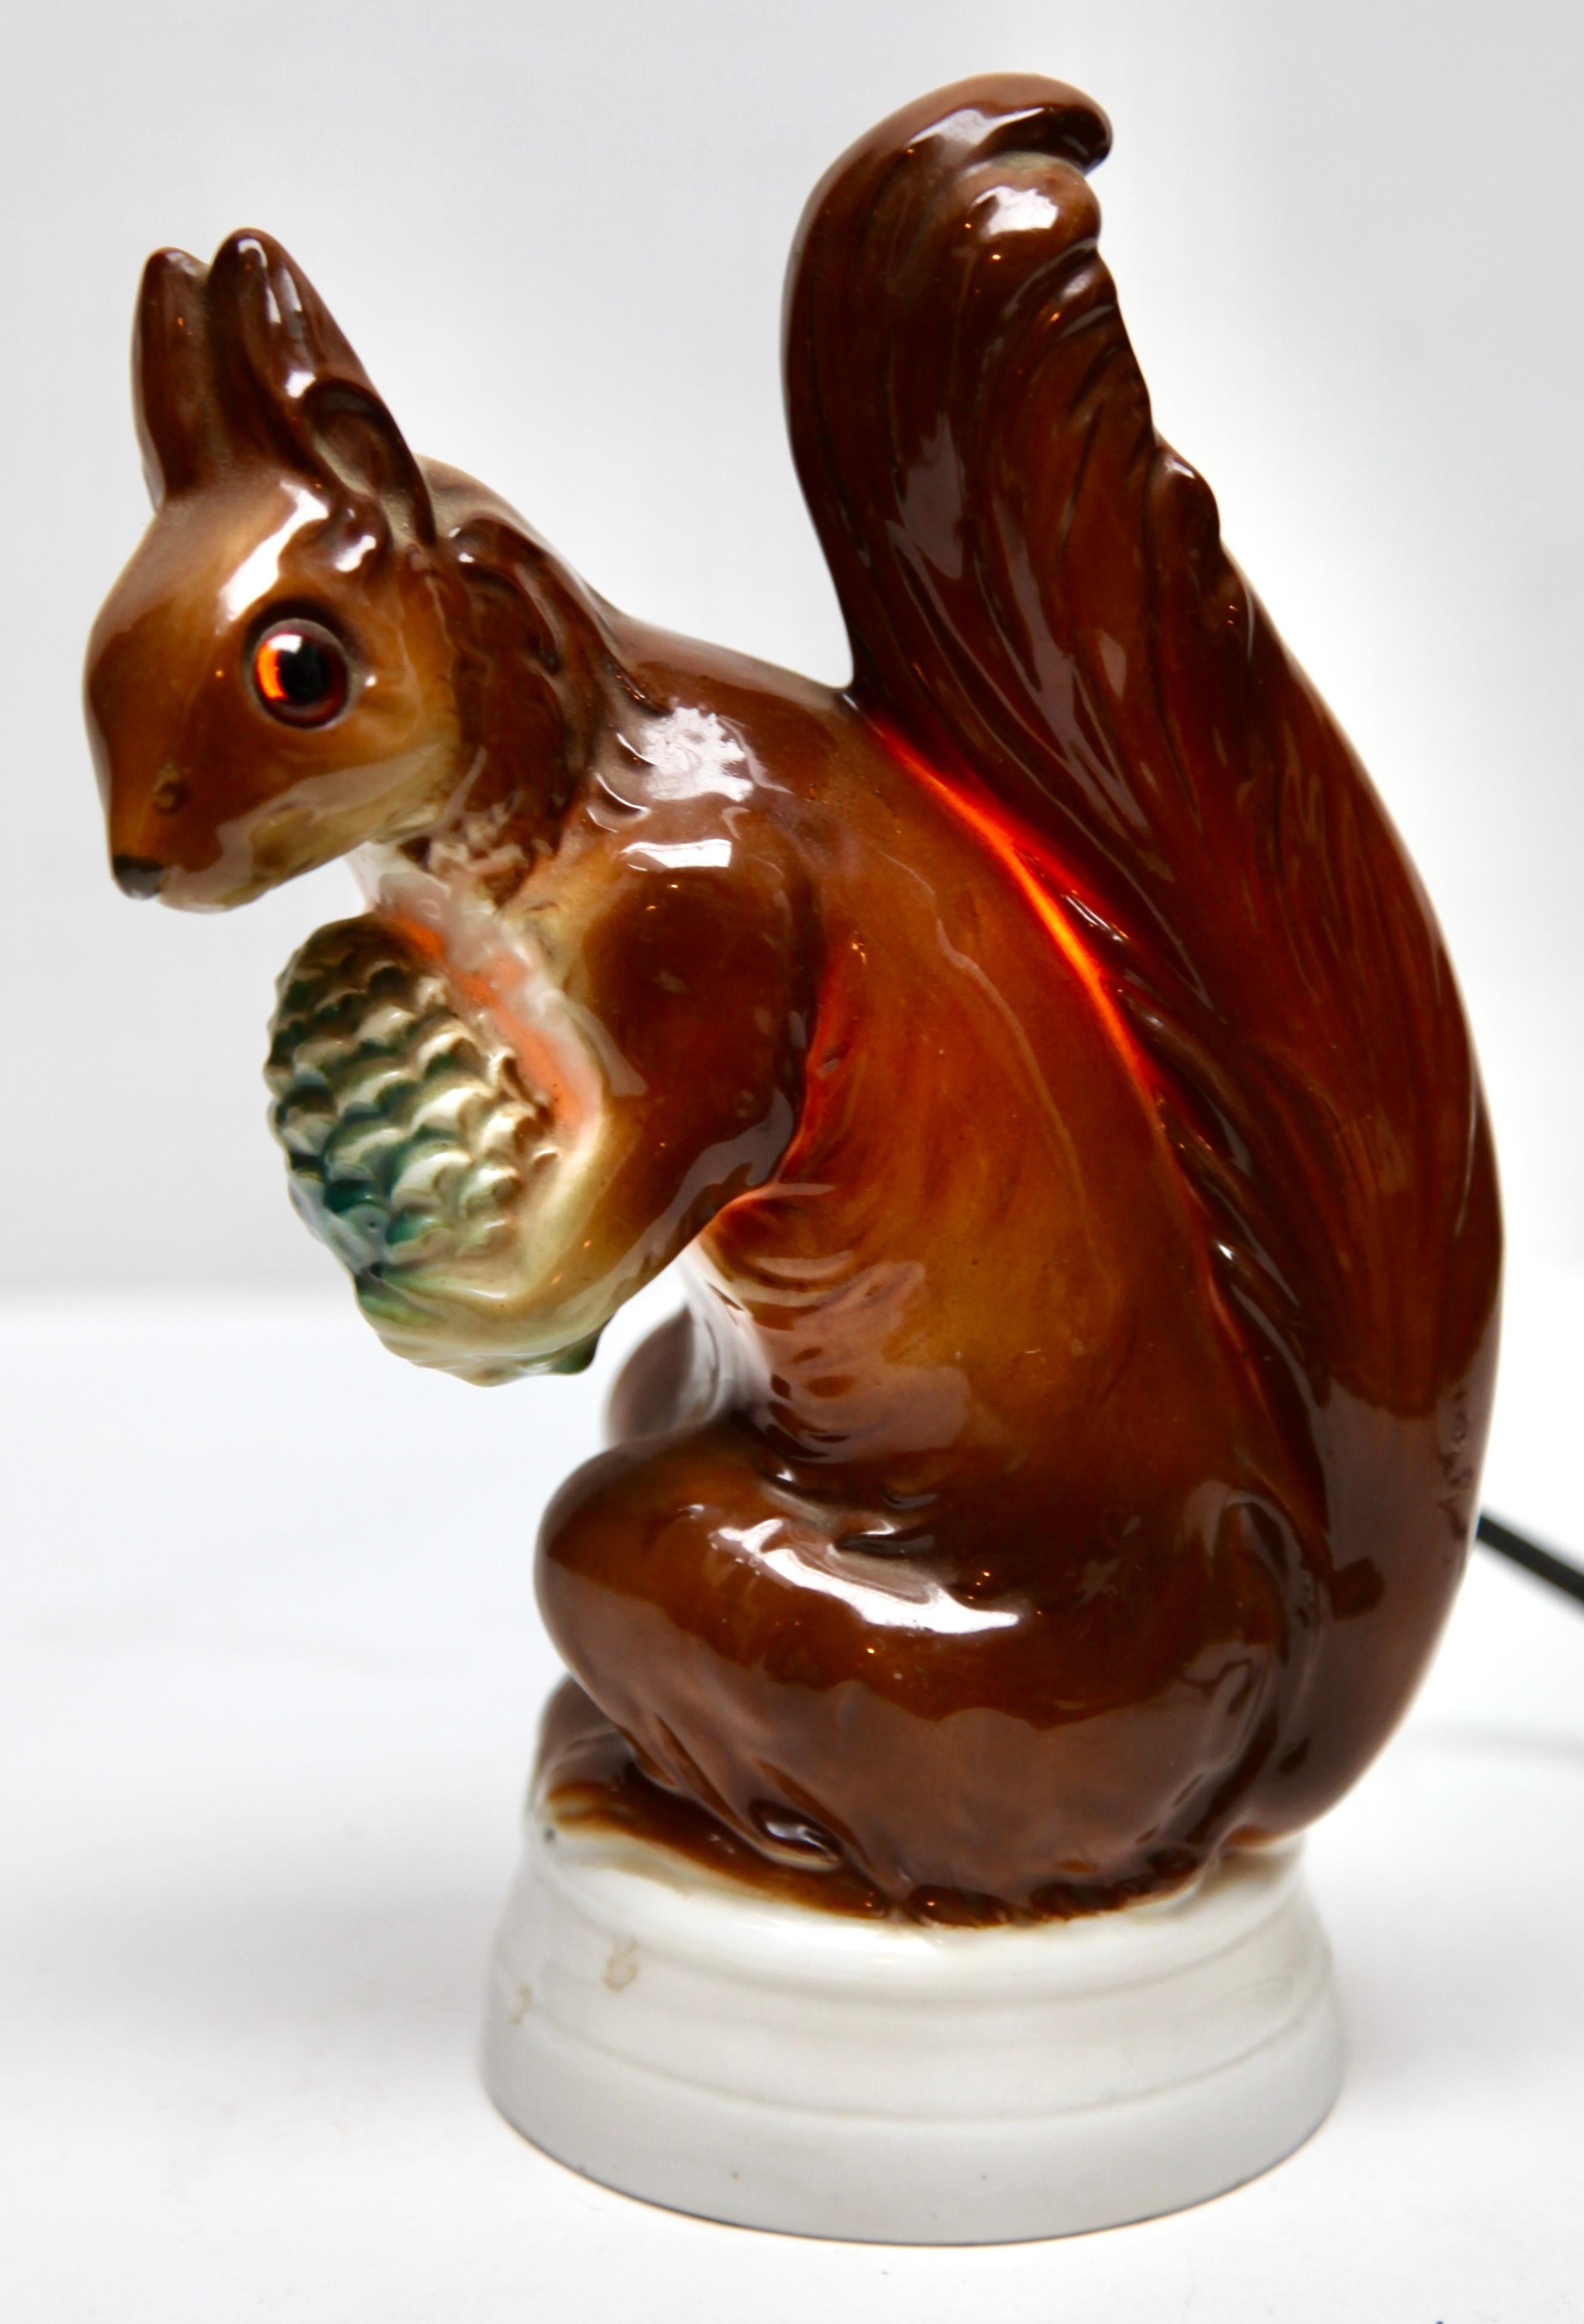 Perfume lamp in the form of a squirrel attributed to Carl Scheidig Grafenthal, Germany. 
Made from glazed porcelain. 
Electrical parts European standards with an inner light bulb (standard E 14) to give a warm and comforting night light. The light